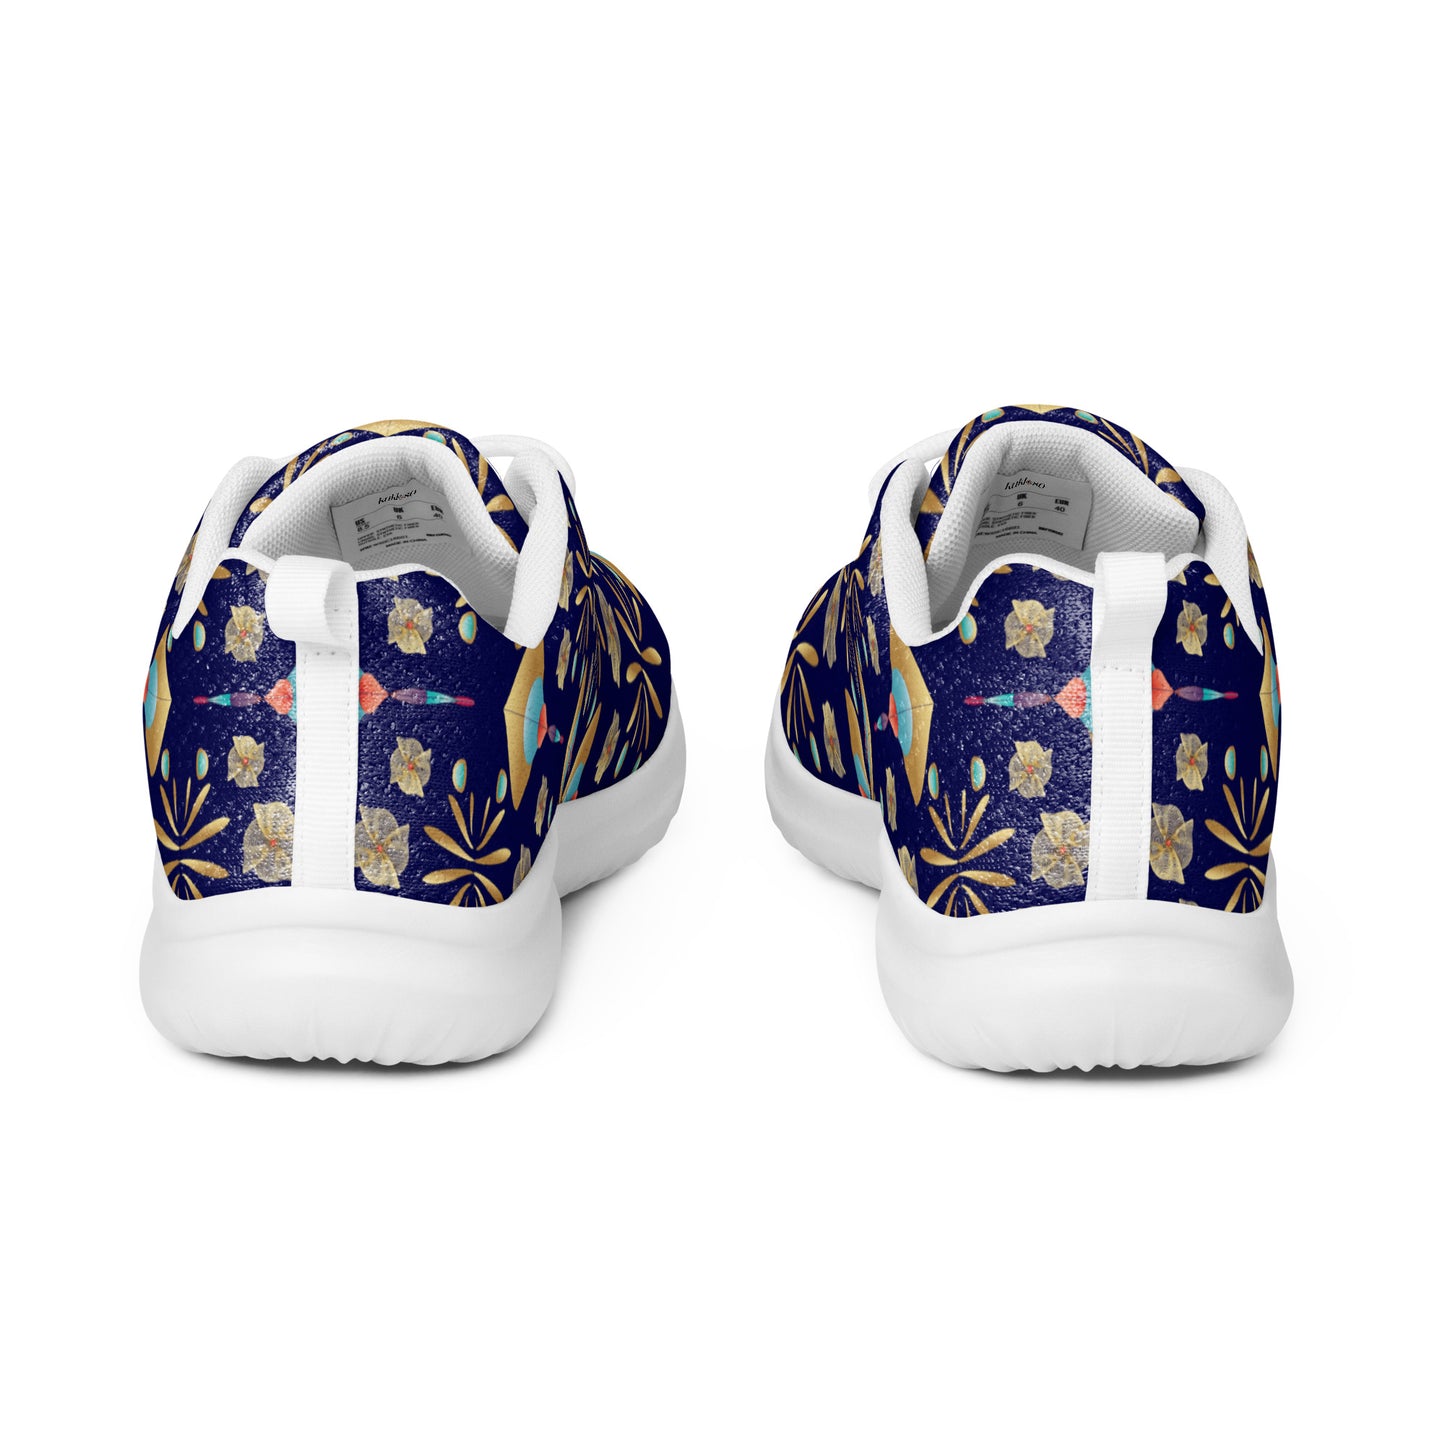 Women’s athletic shoes Kukloso Abstractical No 55 Gold Shapes on Navy - Free Shipping